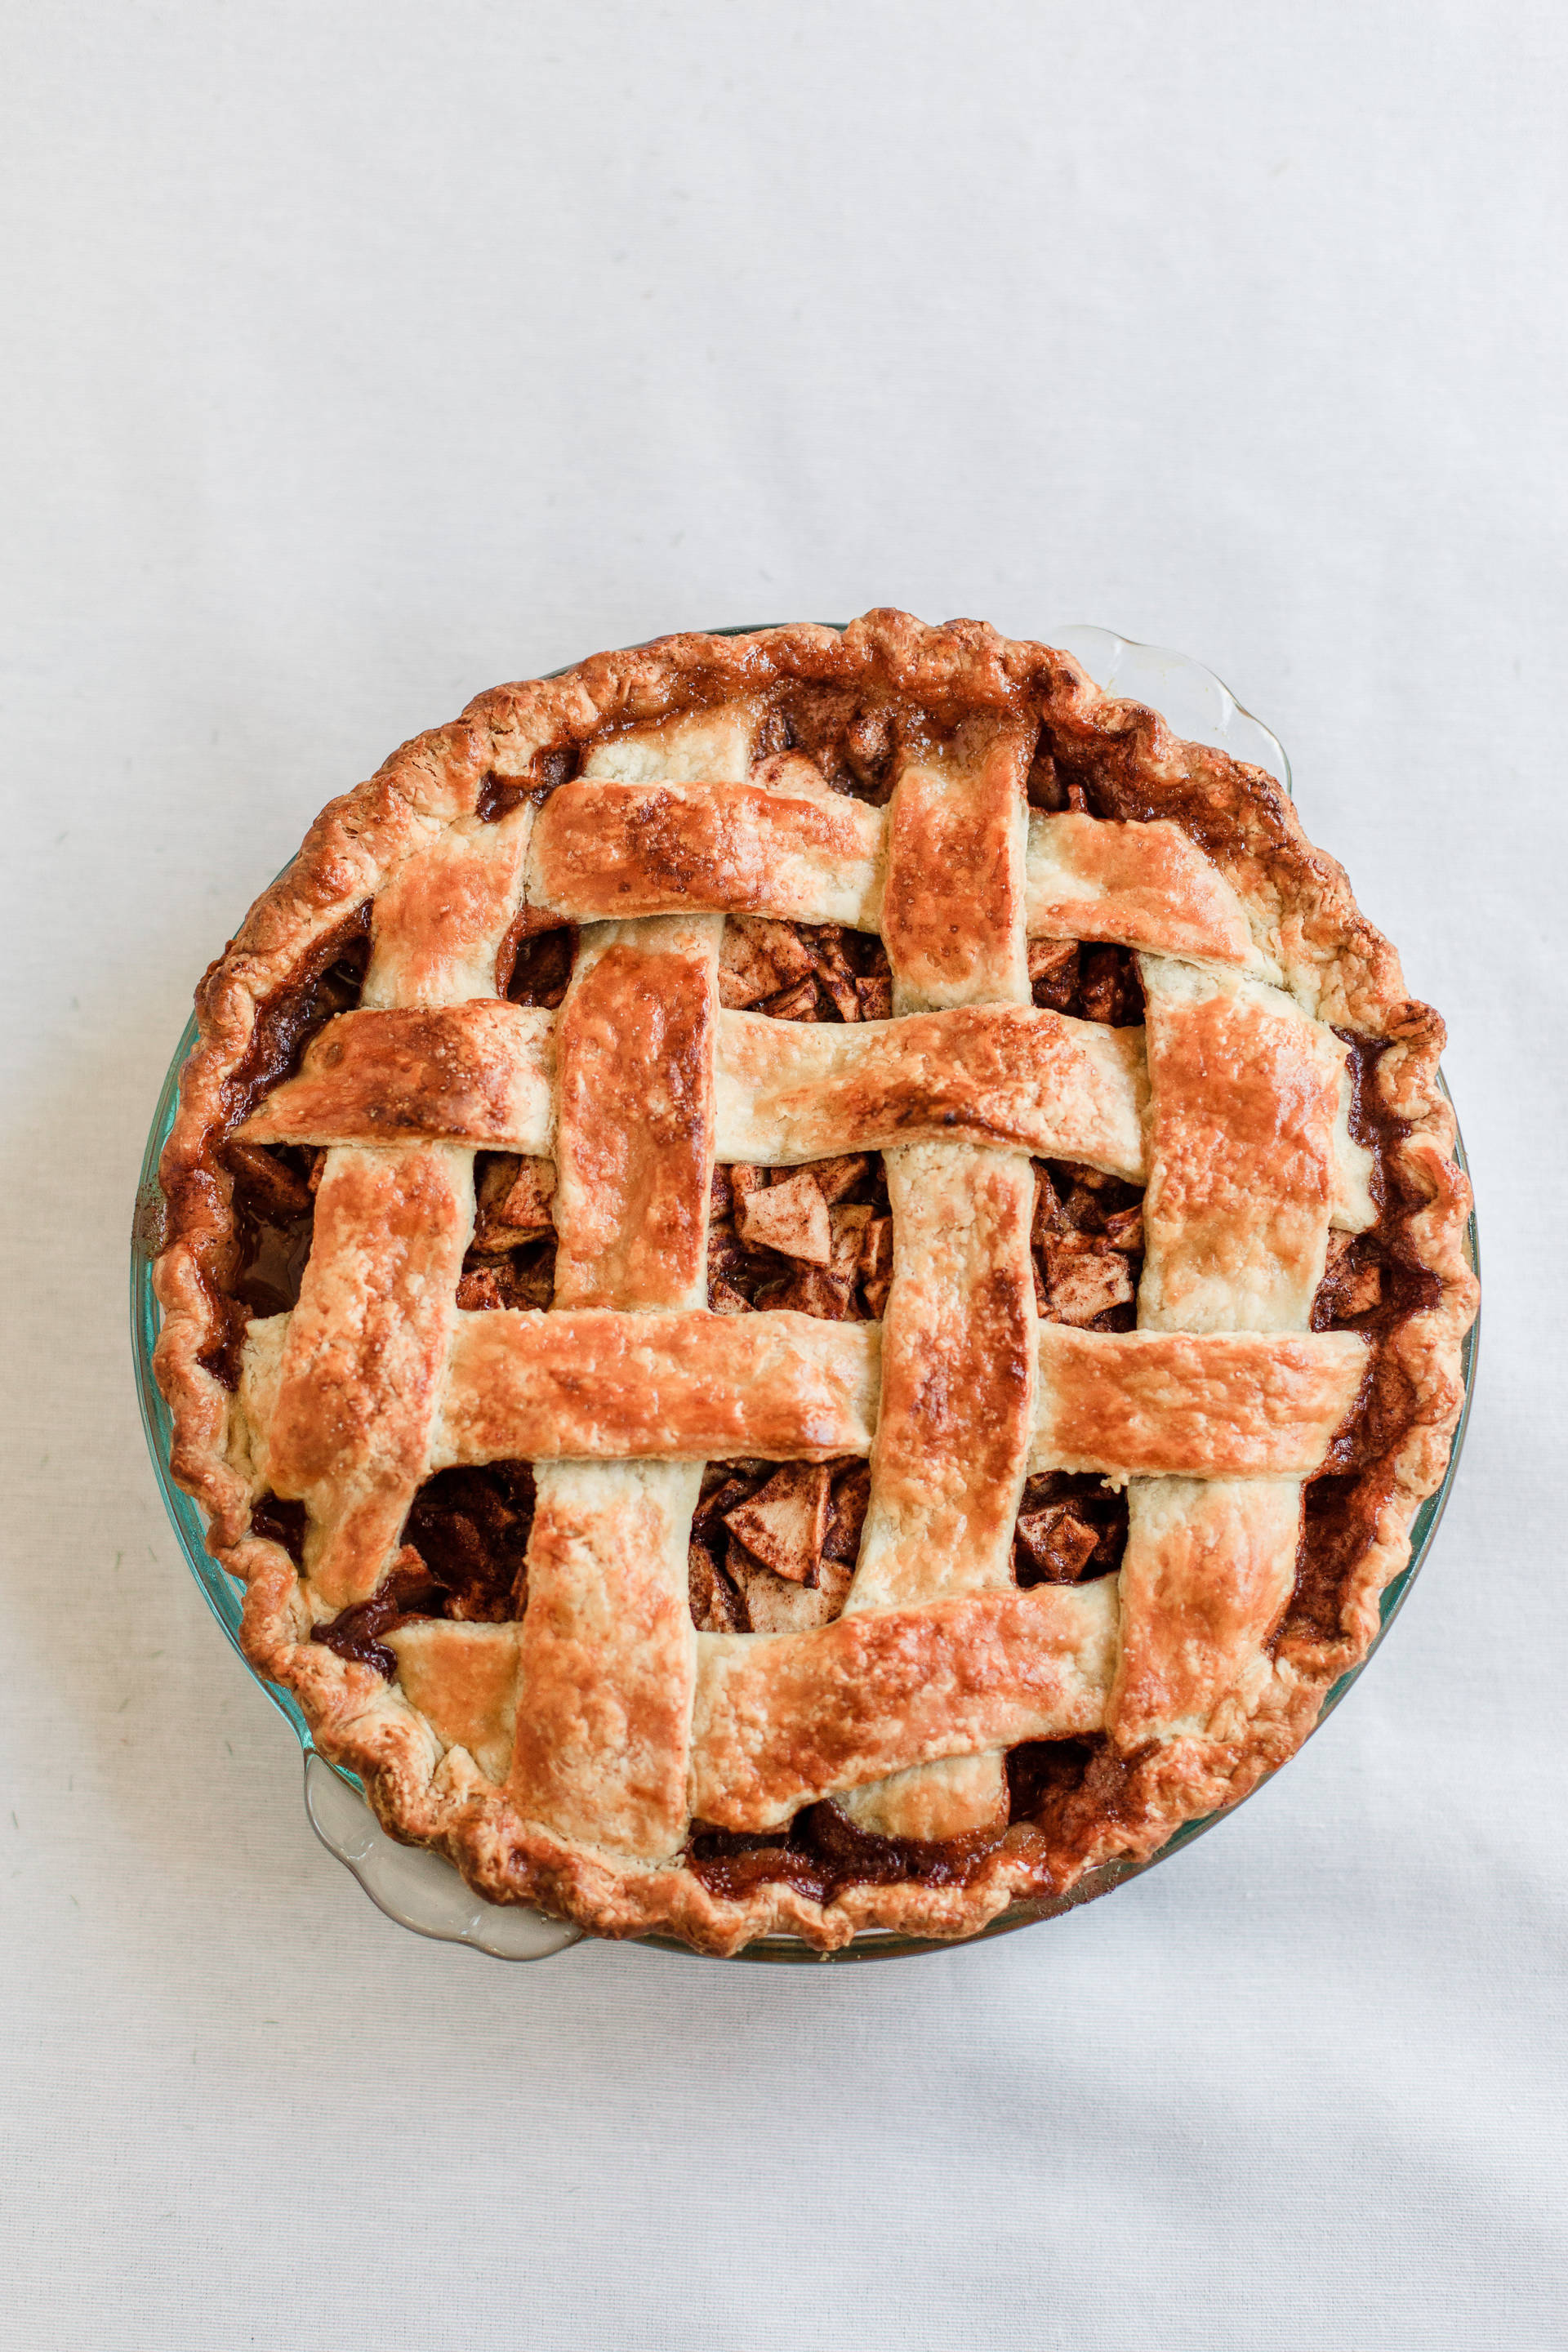 Home For The Holiday’s Part 3: Thanksgiving Apple Pie – Ruthie Ridley